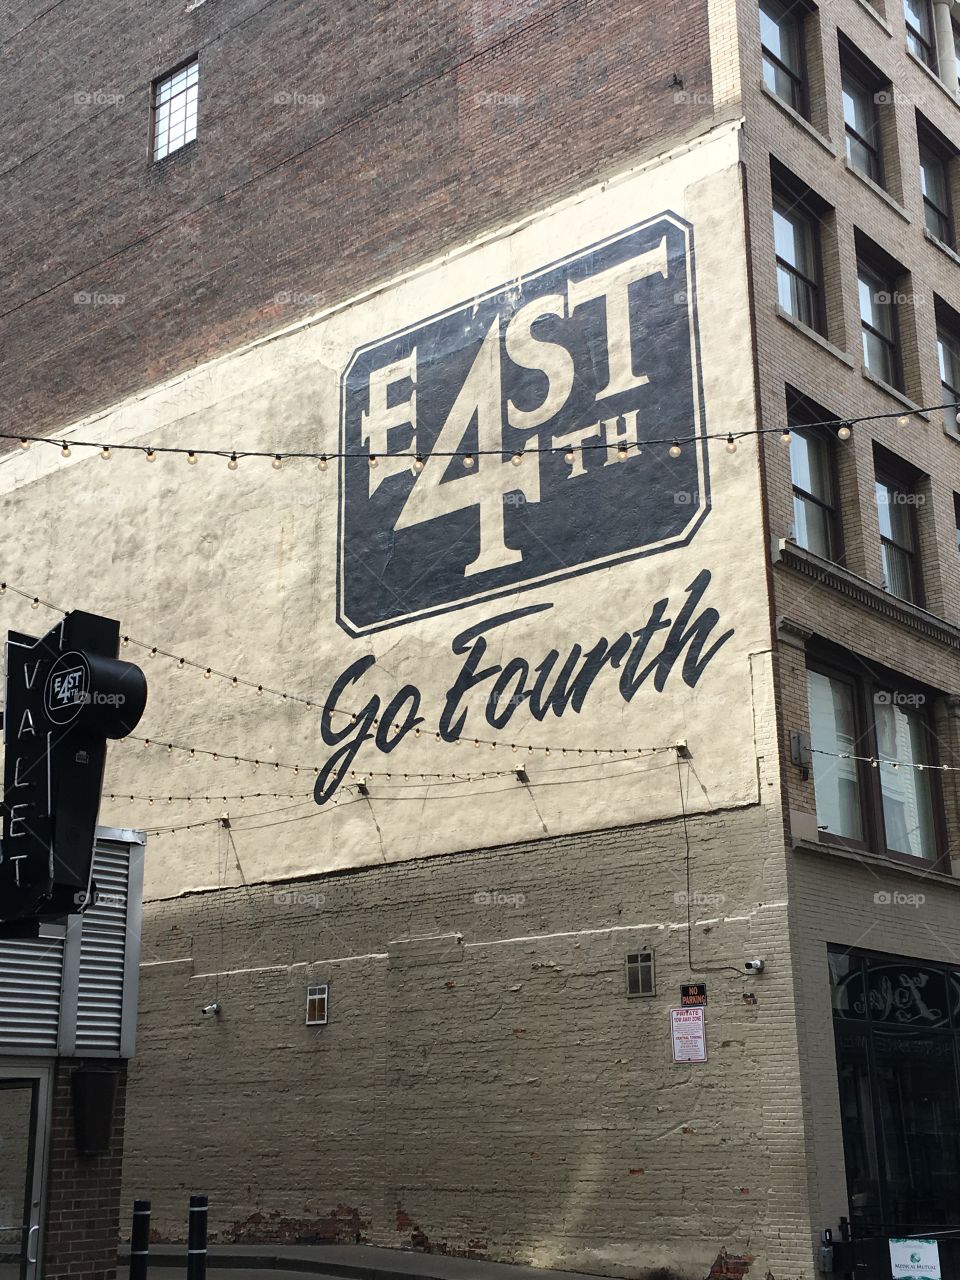 East Fourth is a cool street for people who love food. 